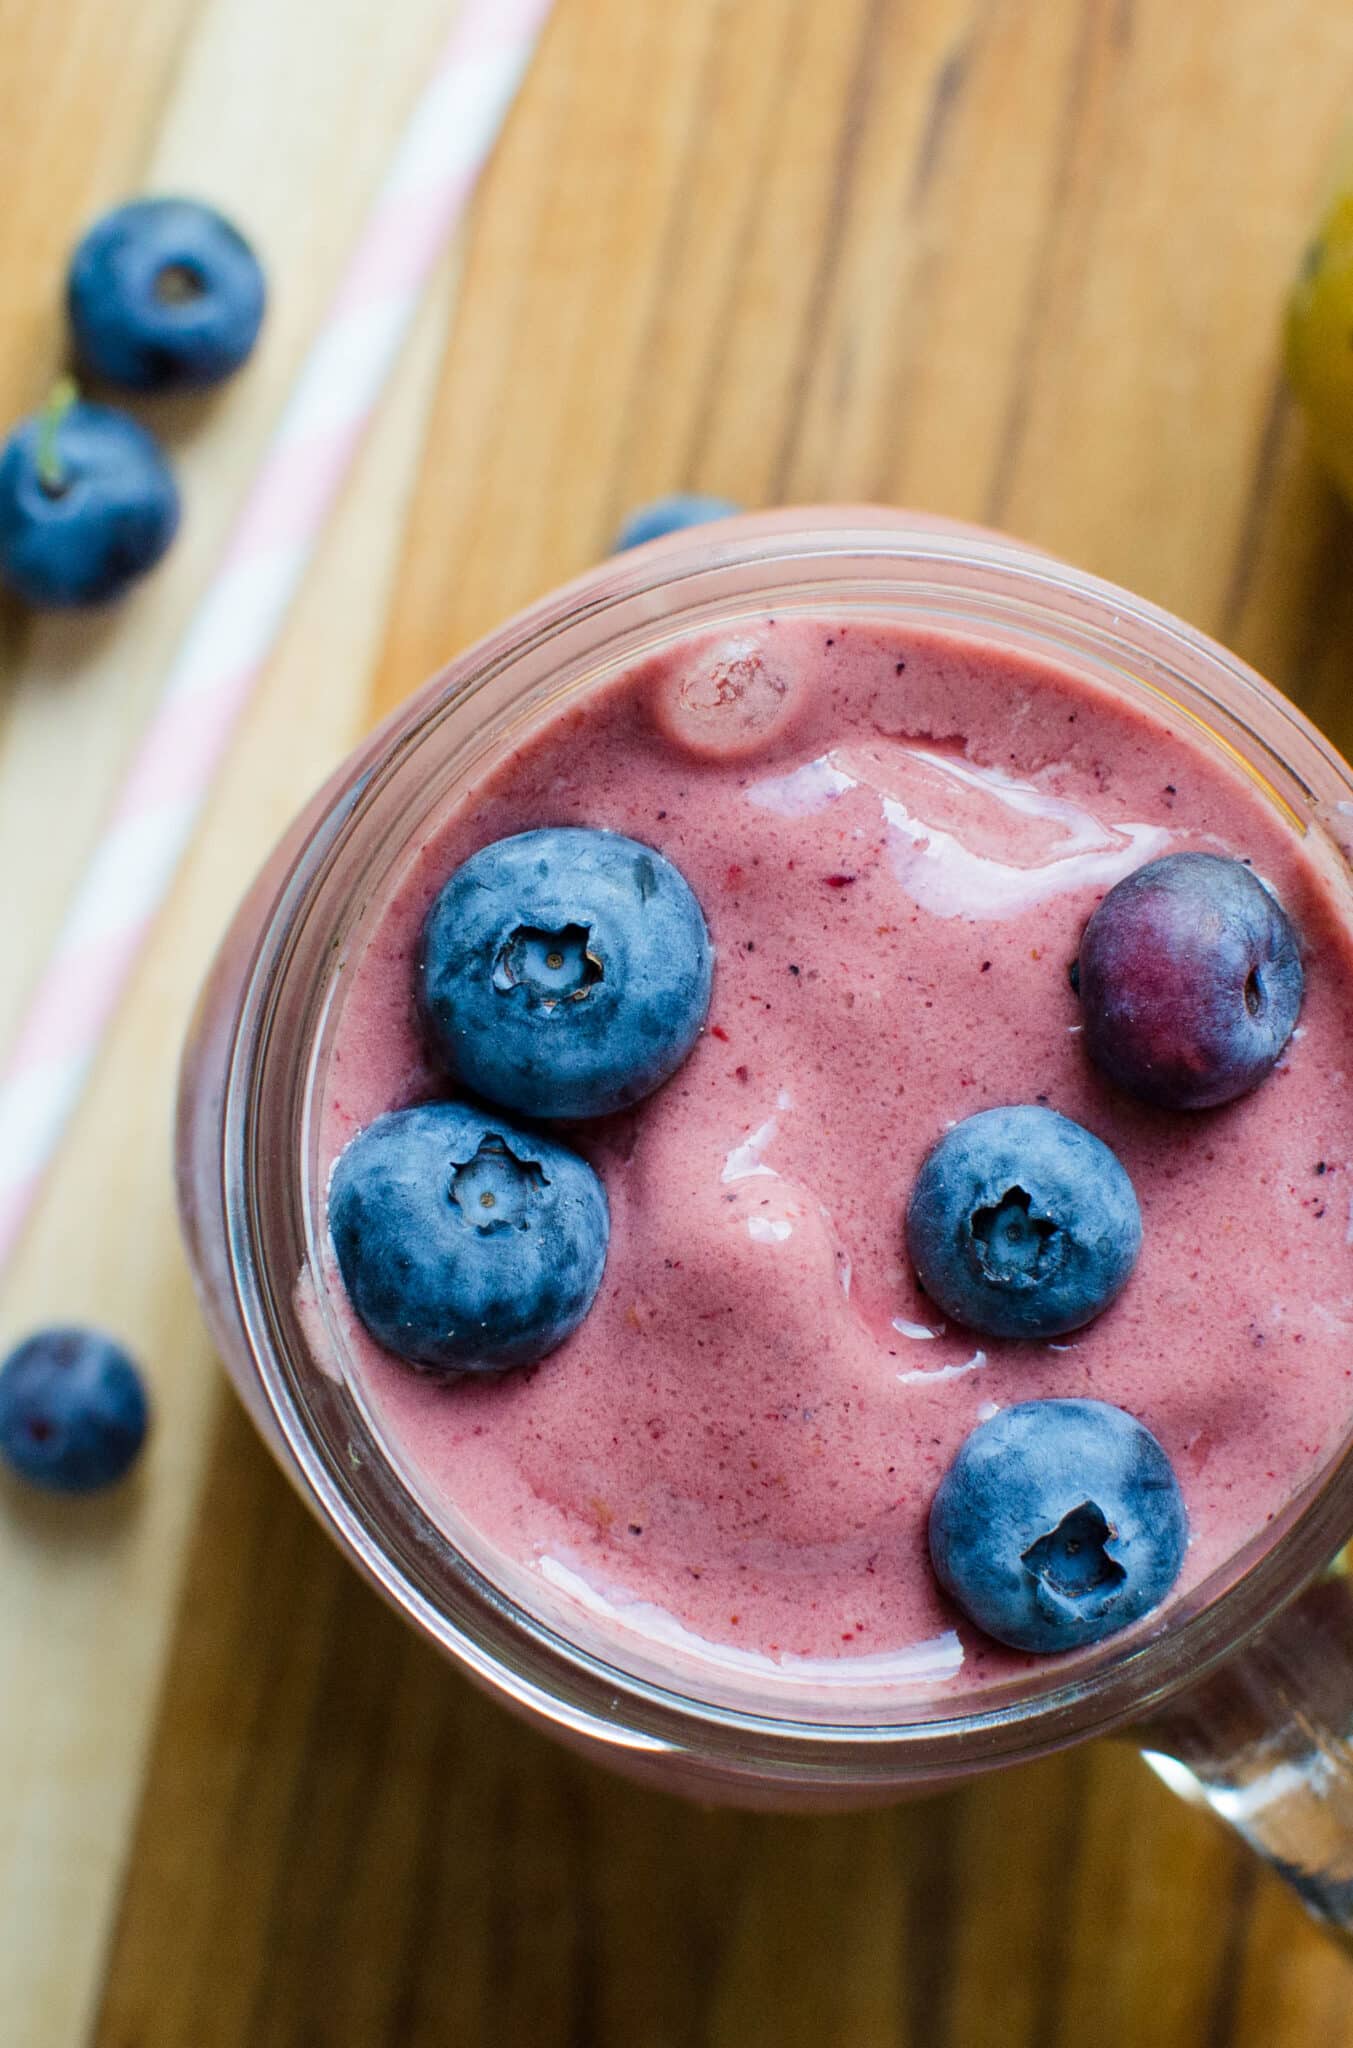 A mango smoothie with blueberries.